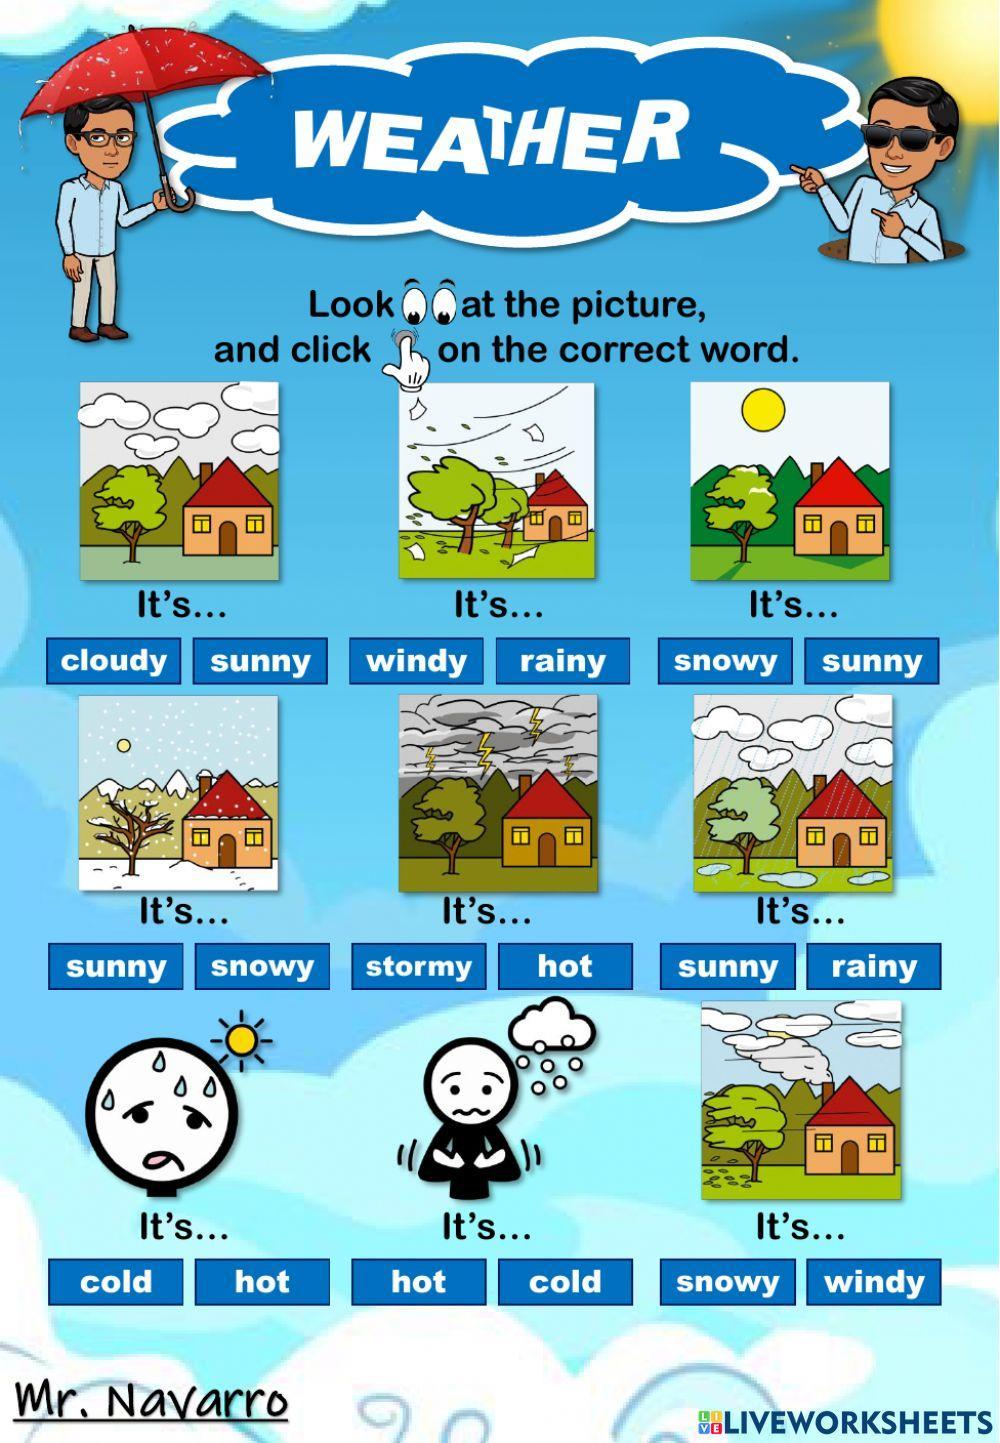 Weather (Look at the picture and click on the correct word)